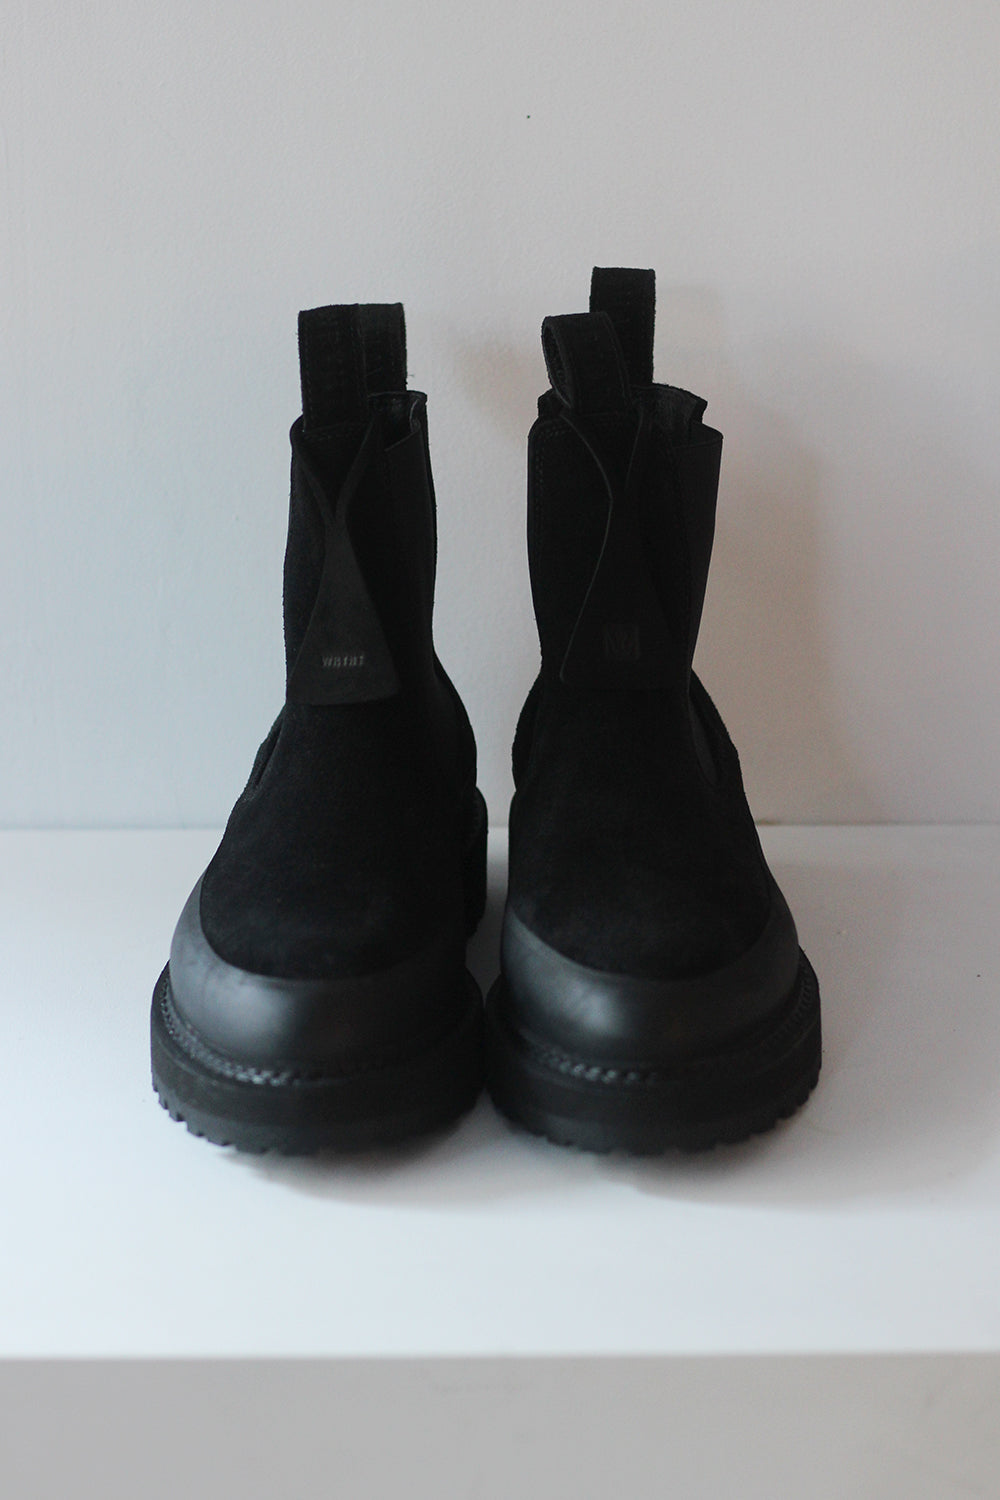 WRYHT "SIDE GORE COUNTRY BOOTS" (black suede)